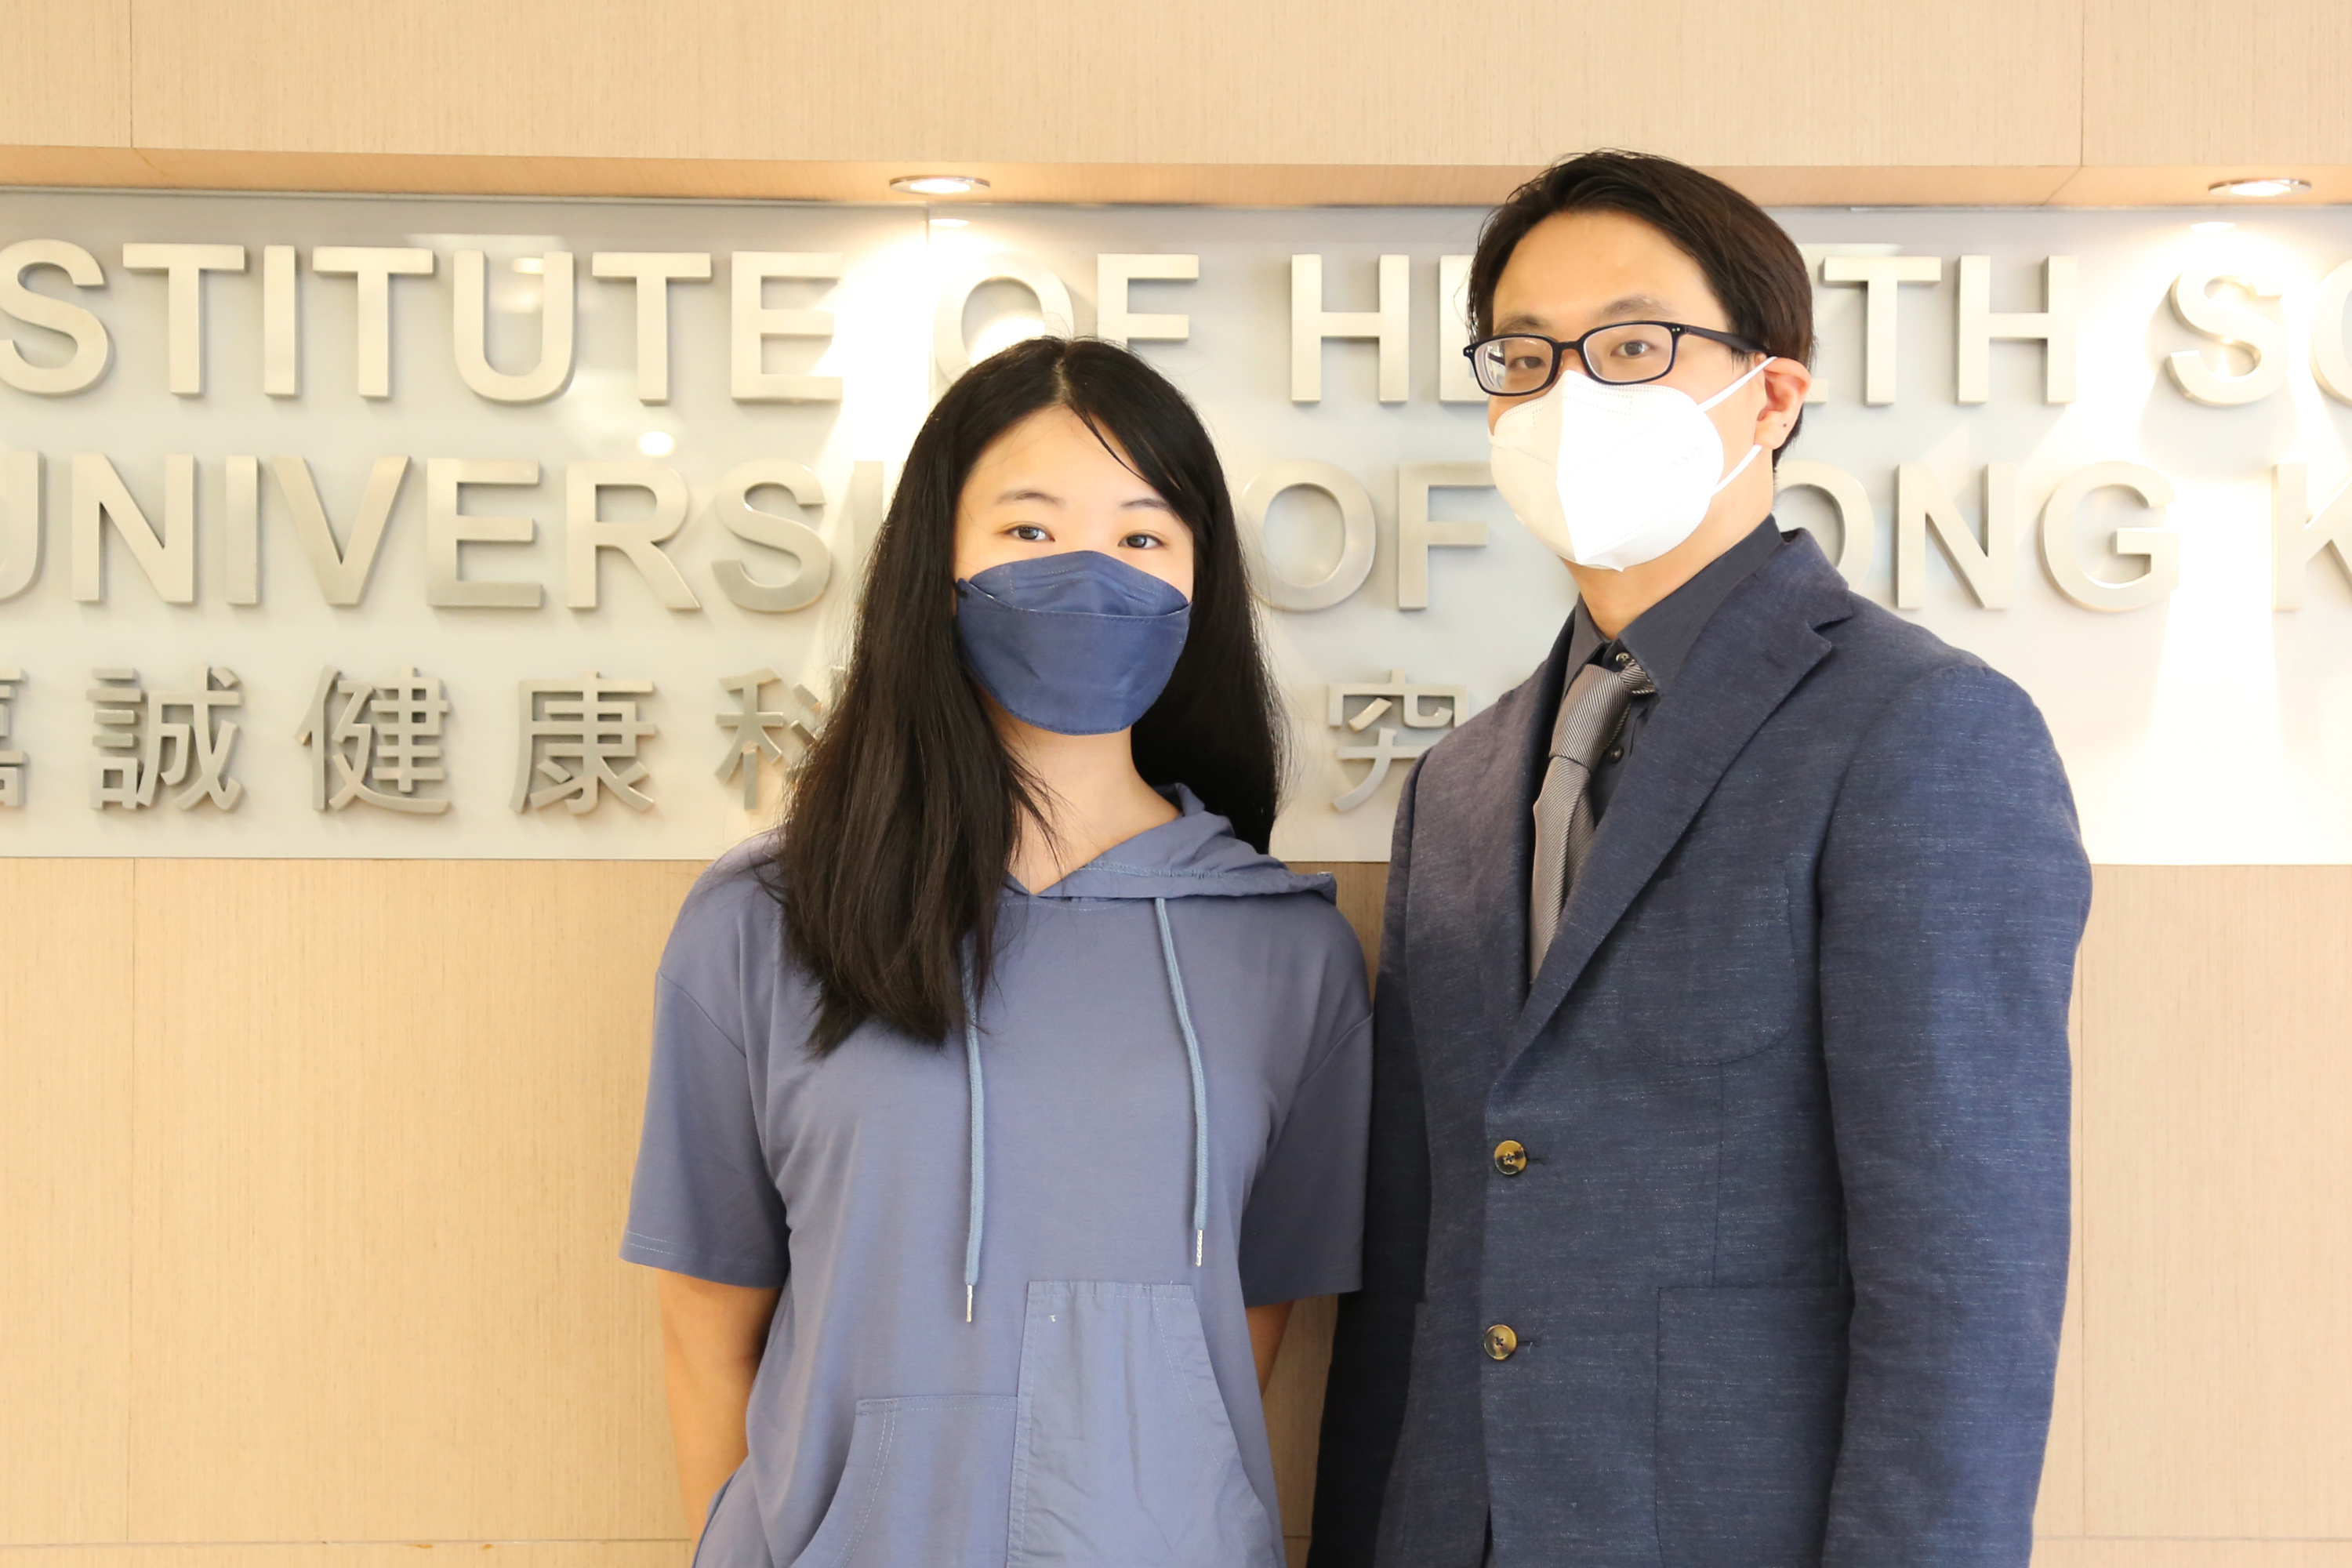 Prof. Peter Cheung and Dr. Au Wing Ying